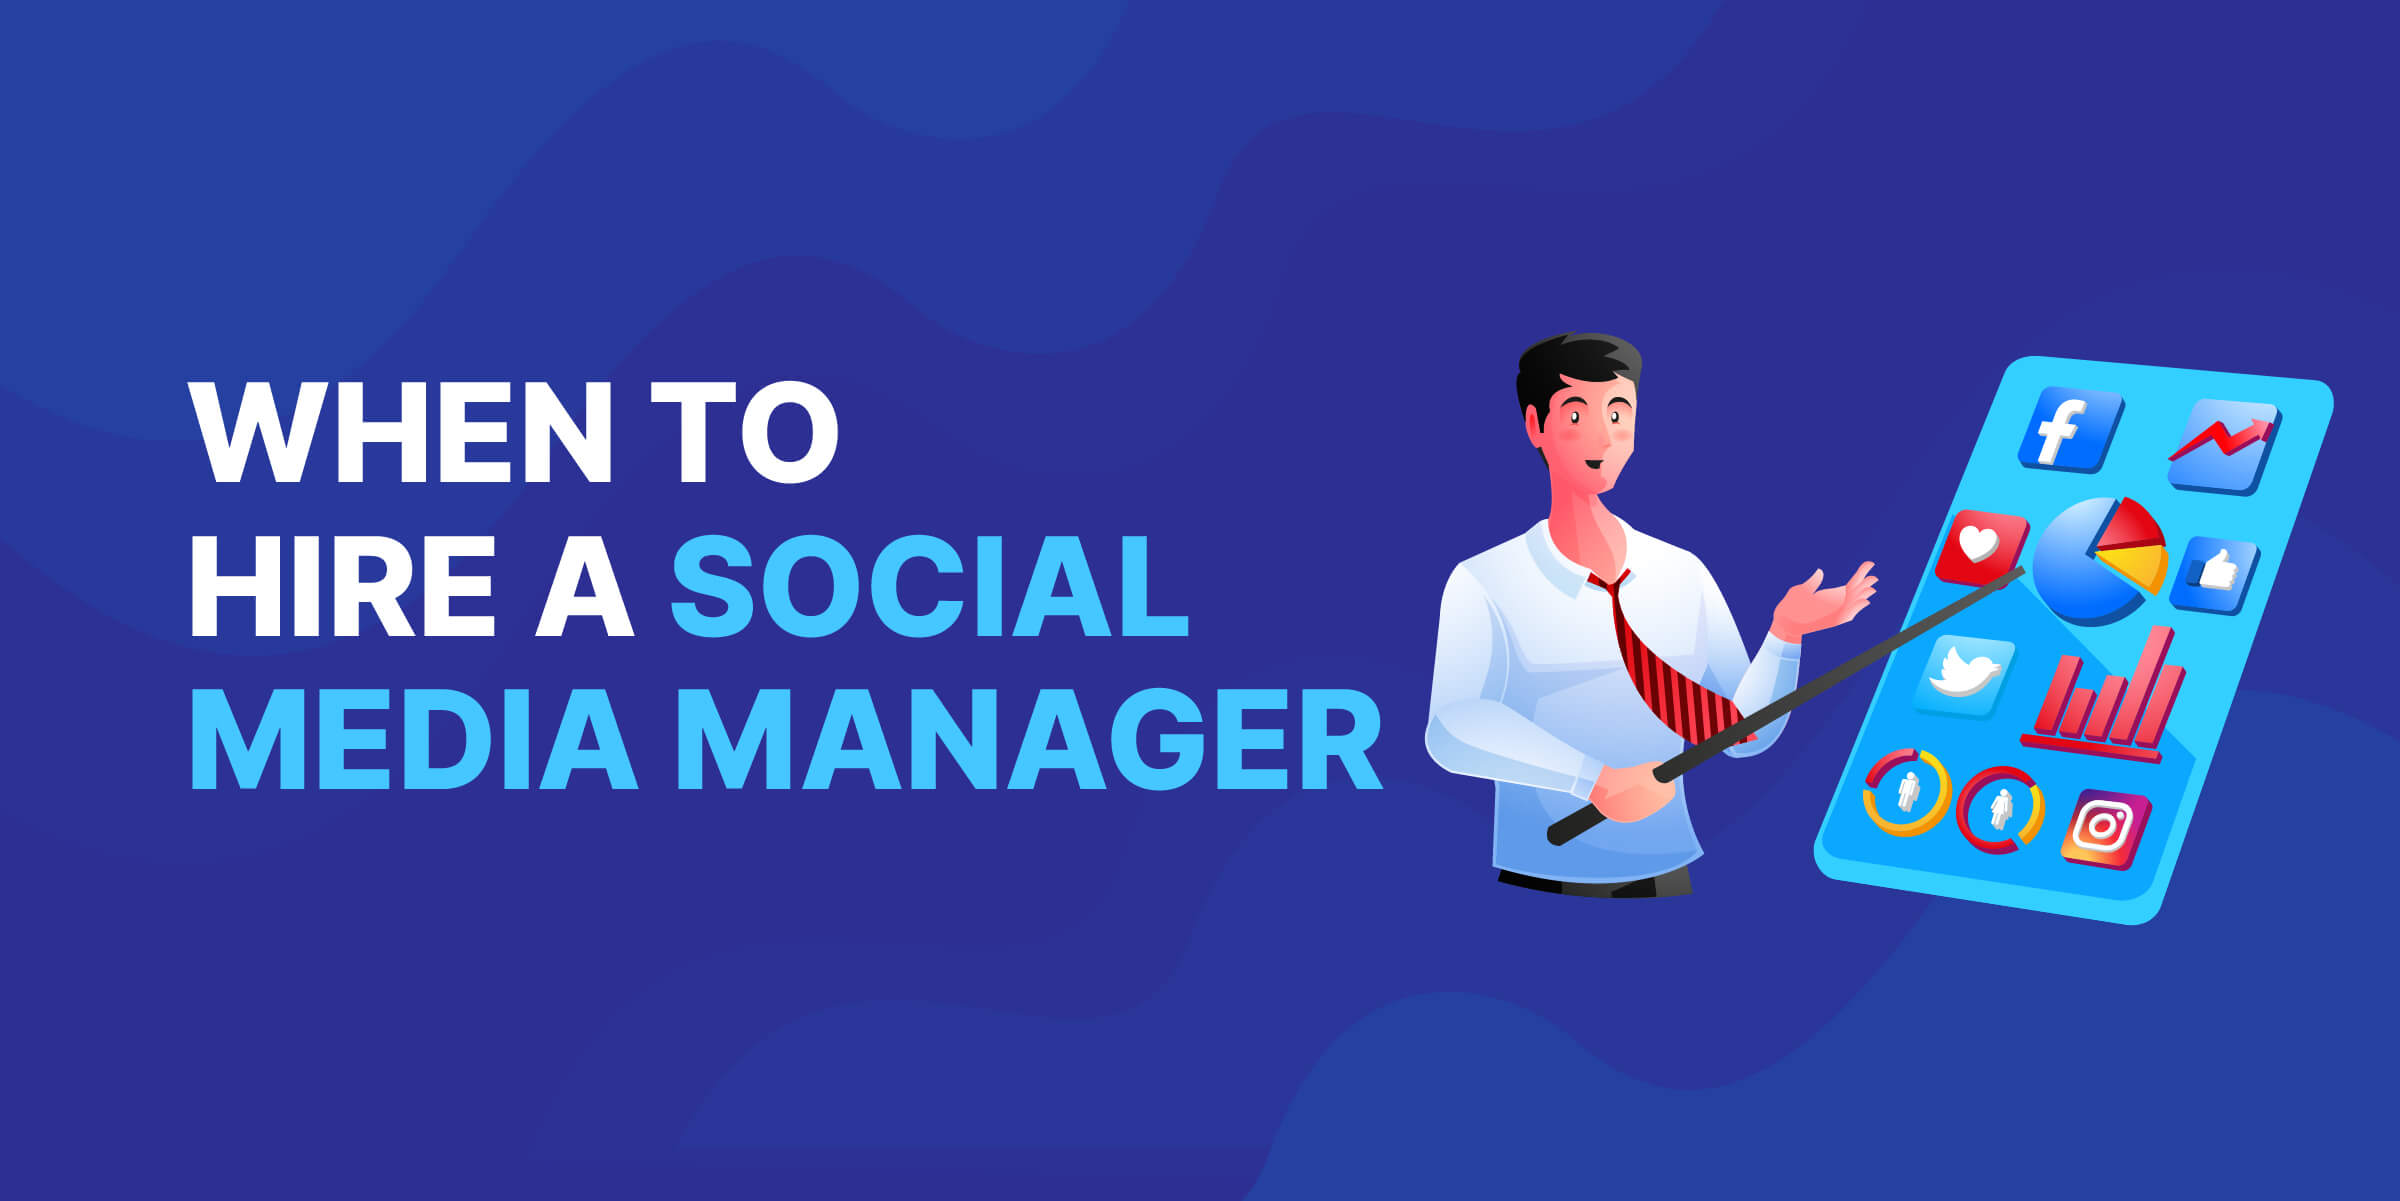 When to Hire a Social Media Manager